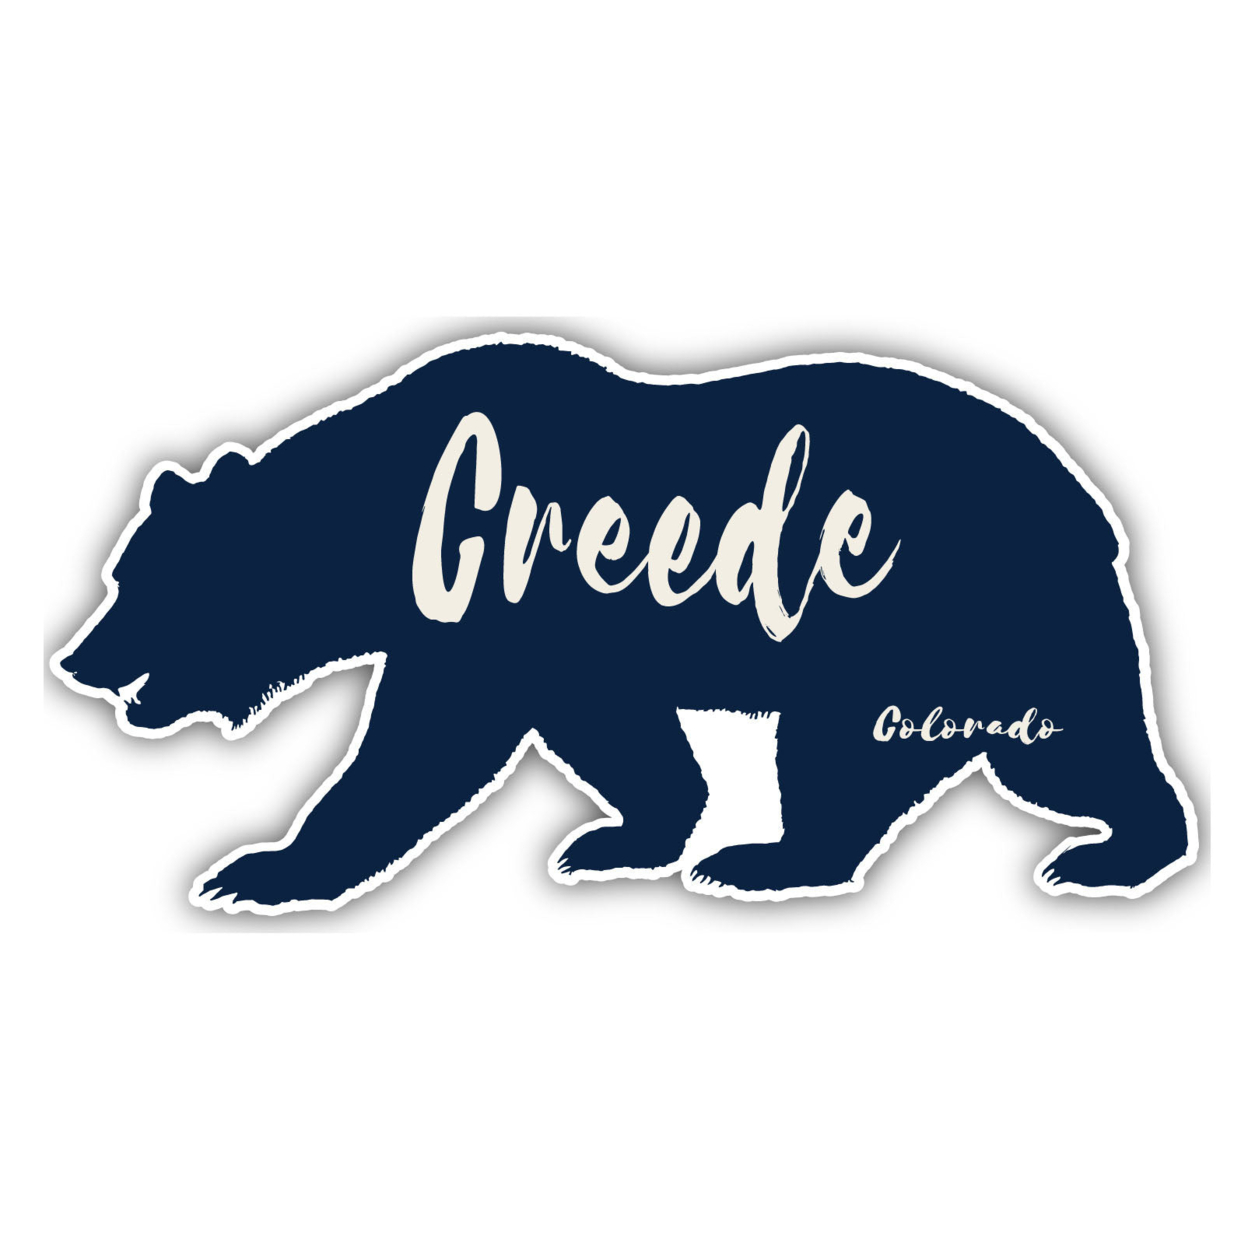 Creede Colorado Souvenir Decorative Stickers (Choose Theme And Size) - 4-Pack, 2-Inch, Camp Life